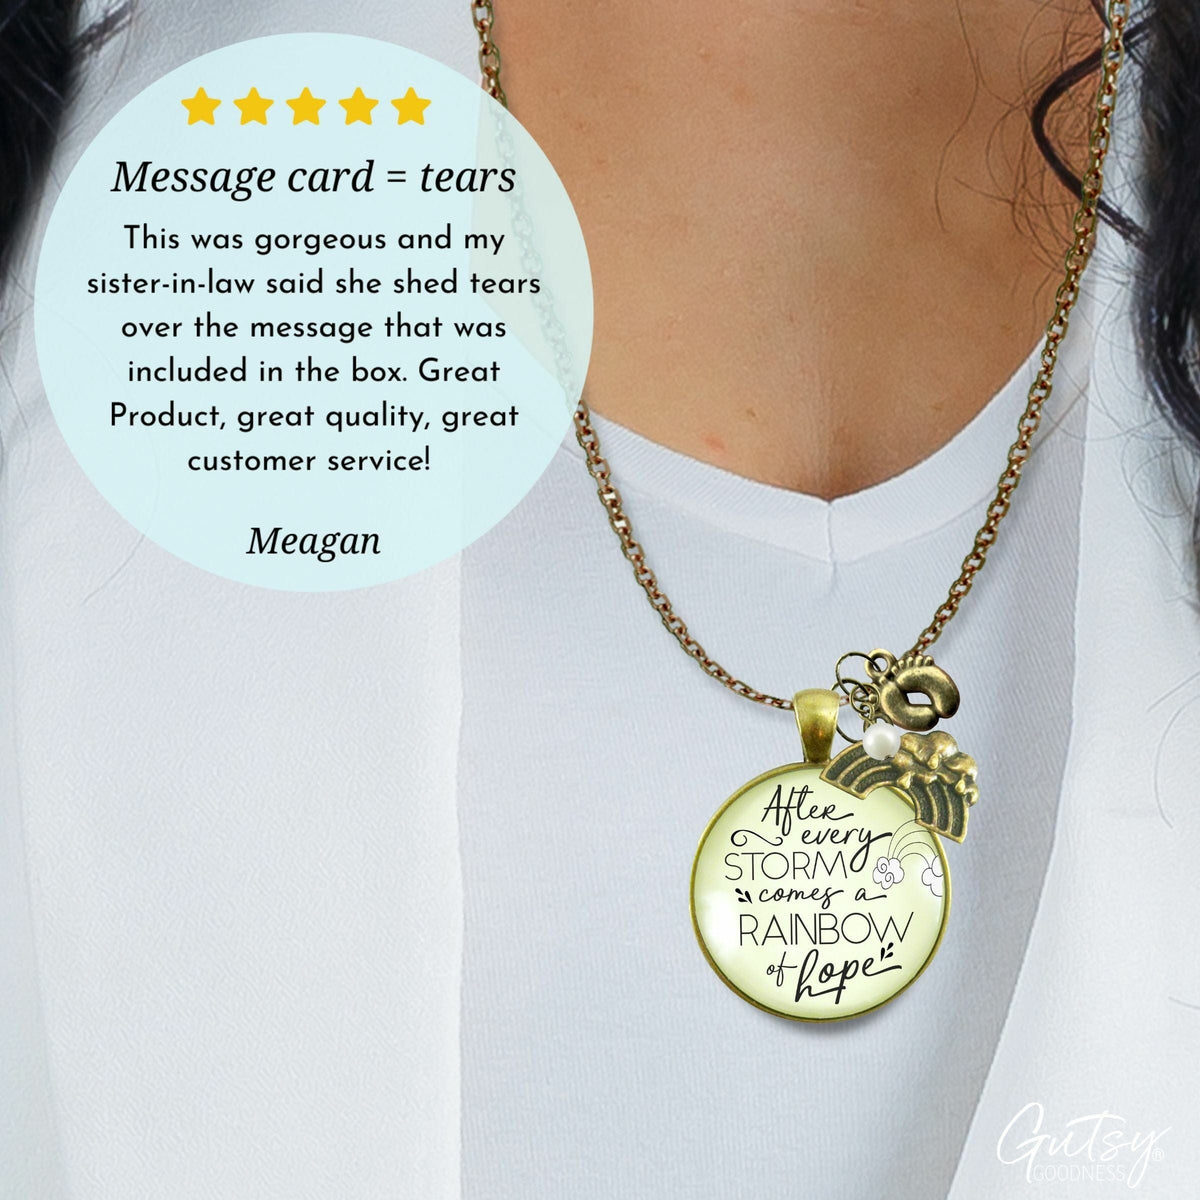 Gutsy Goodness Rainbow Baby Jewelry After Storm Comes Hope Mom Necklace Gift - Gutsy Goodness Handmade Jewelry;Rainbow Baby Jewelry After Storm Comes Hope Mom Necklace Gift - Gutsy Goodness Handmade Jewelry Gifts